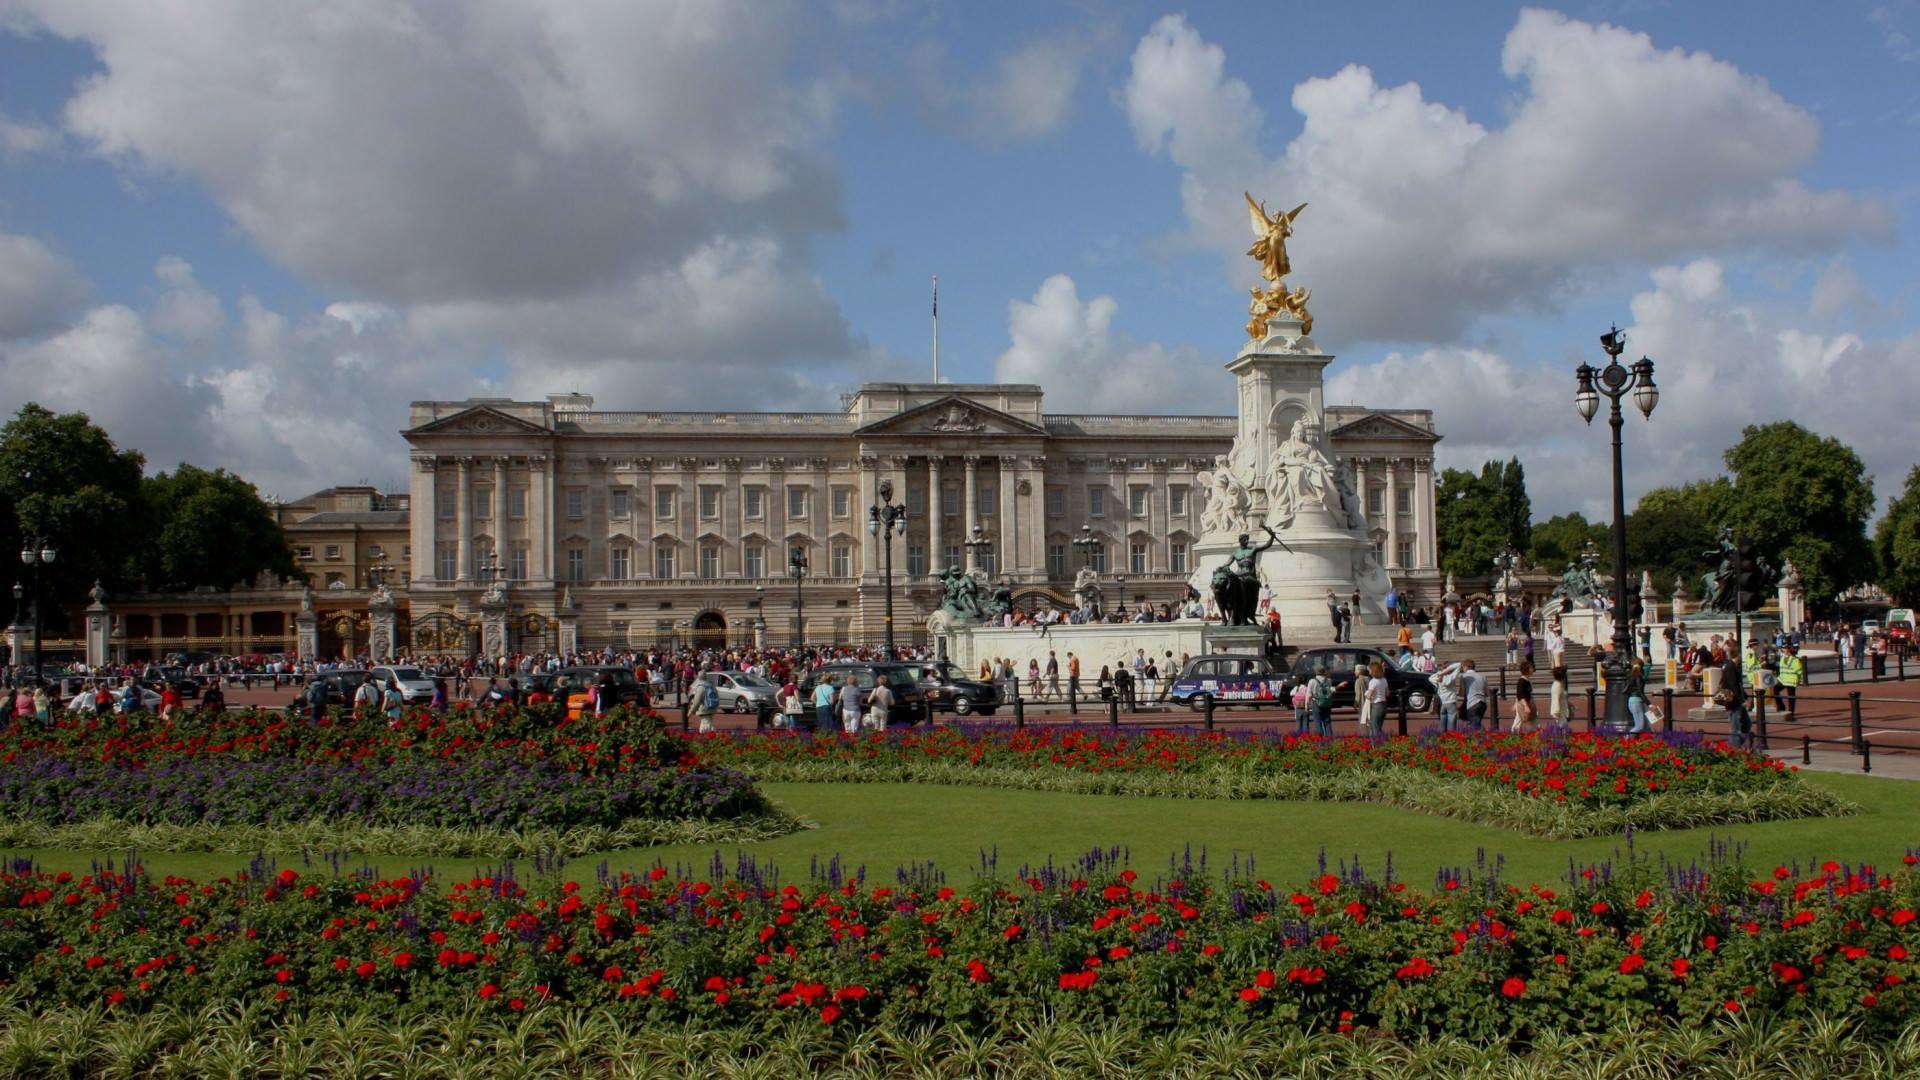 The square in front of Buckingham Palace in London wallpapers and